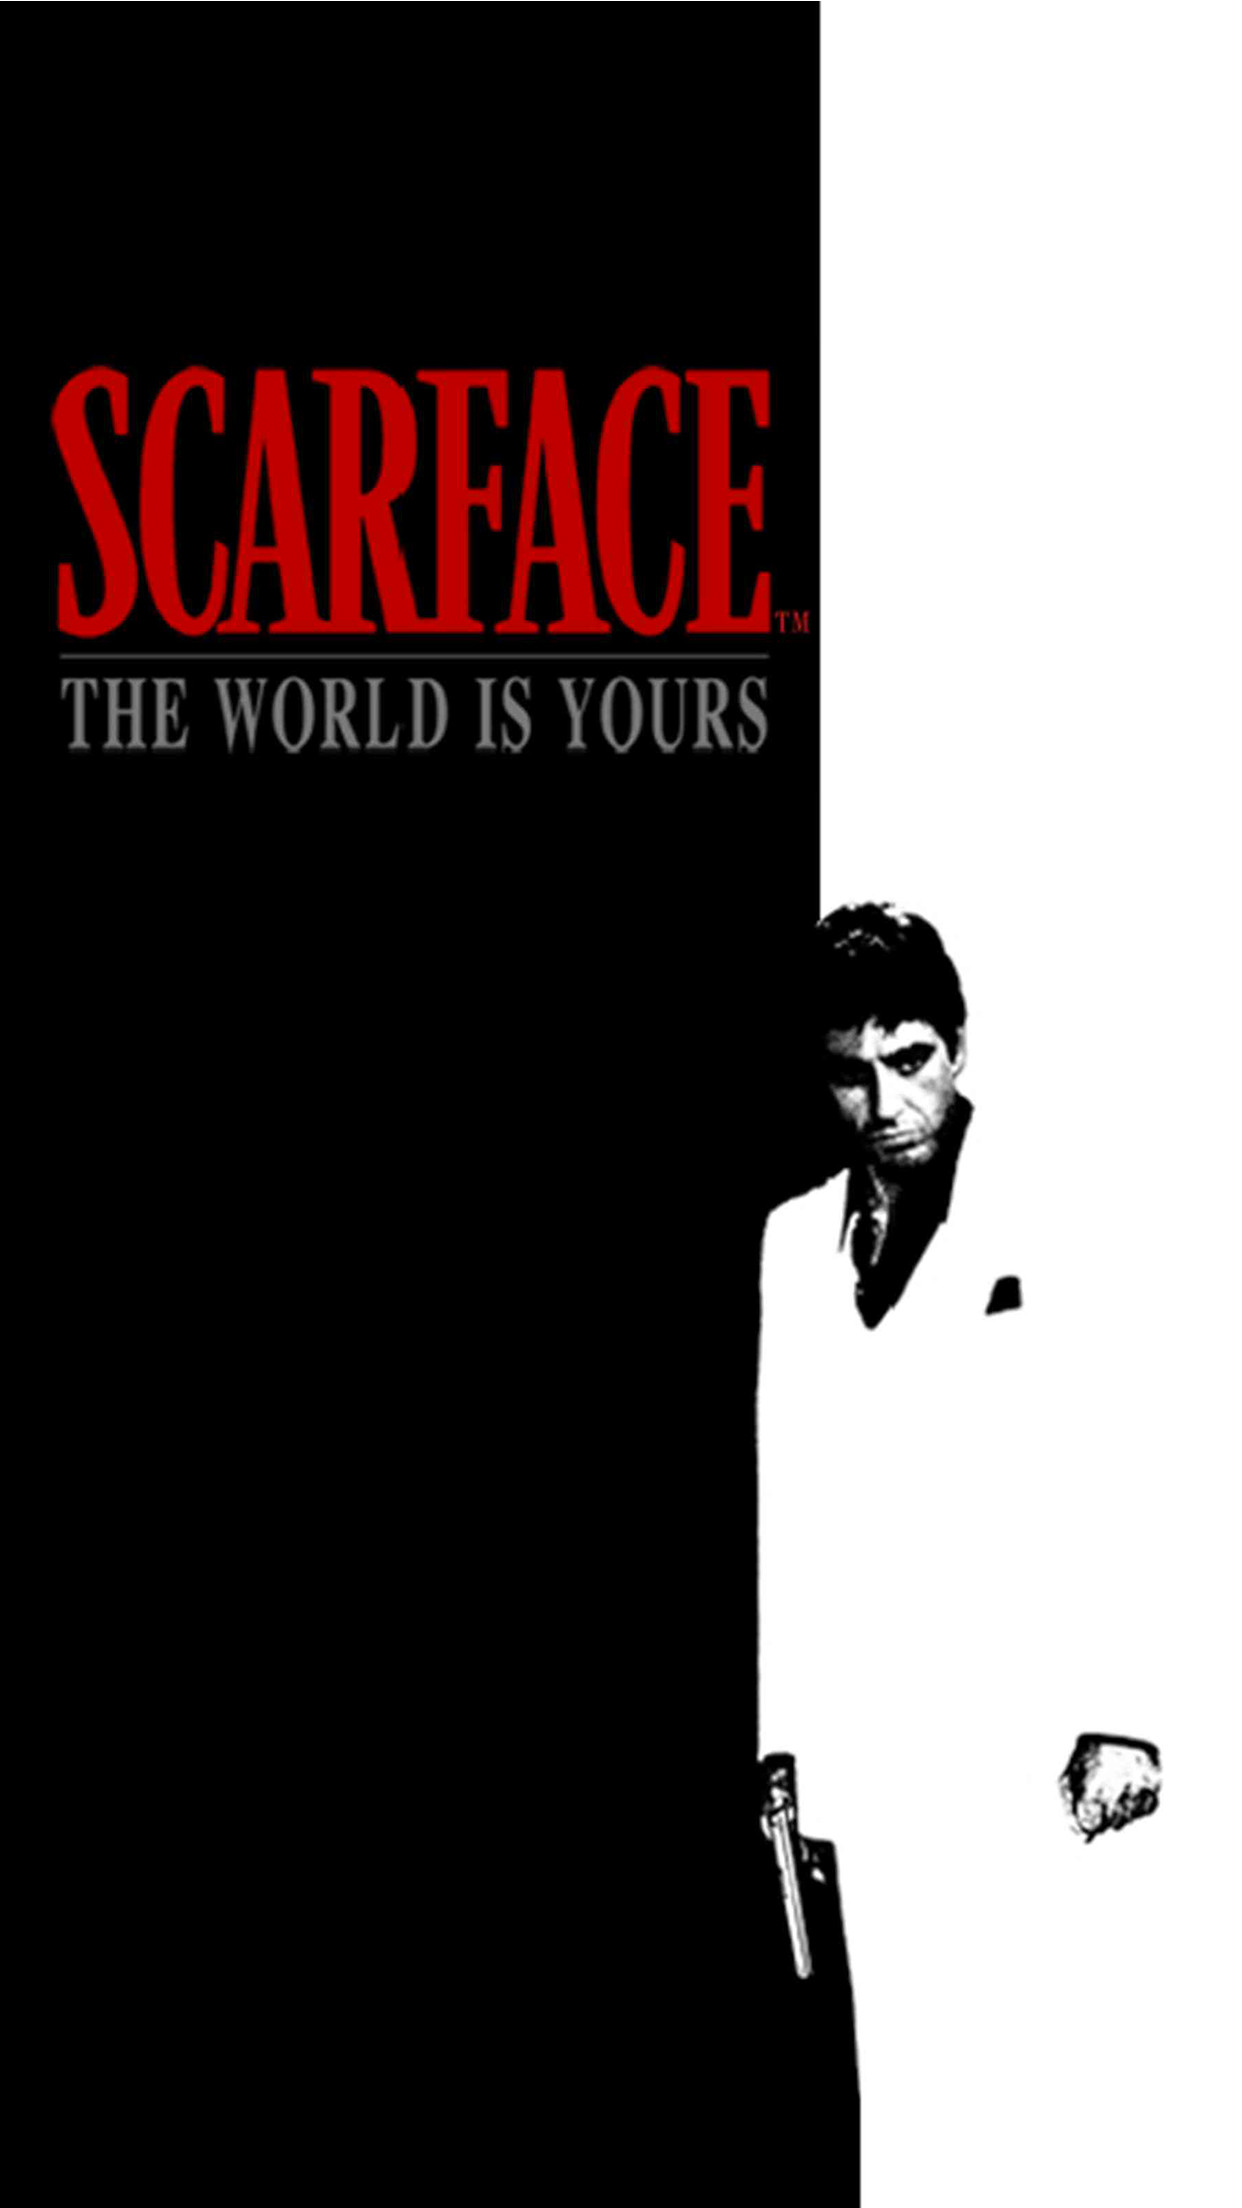 Pin by Achille on I tuoi Pin  Scarface Movie posters design Tony montana